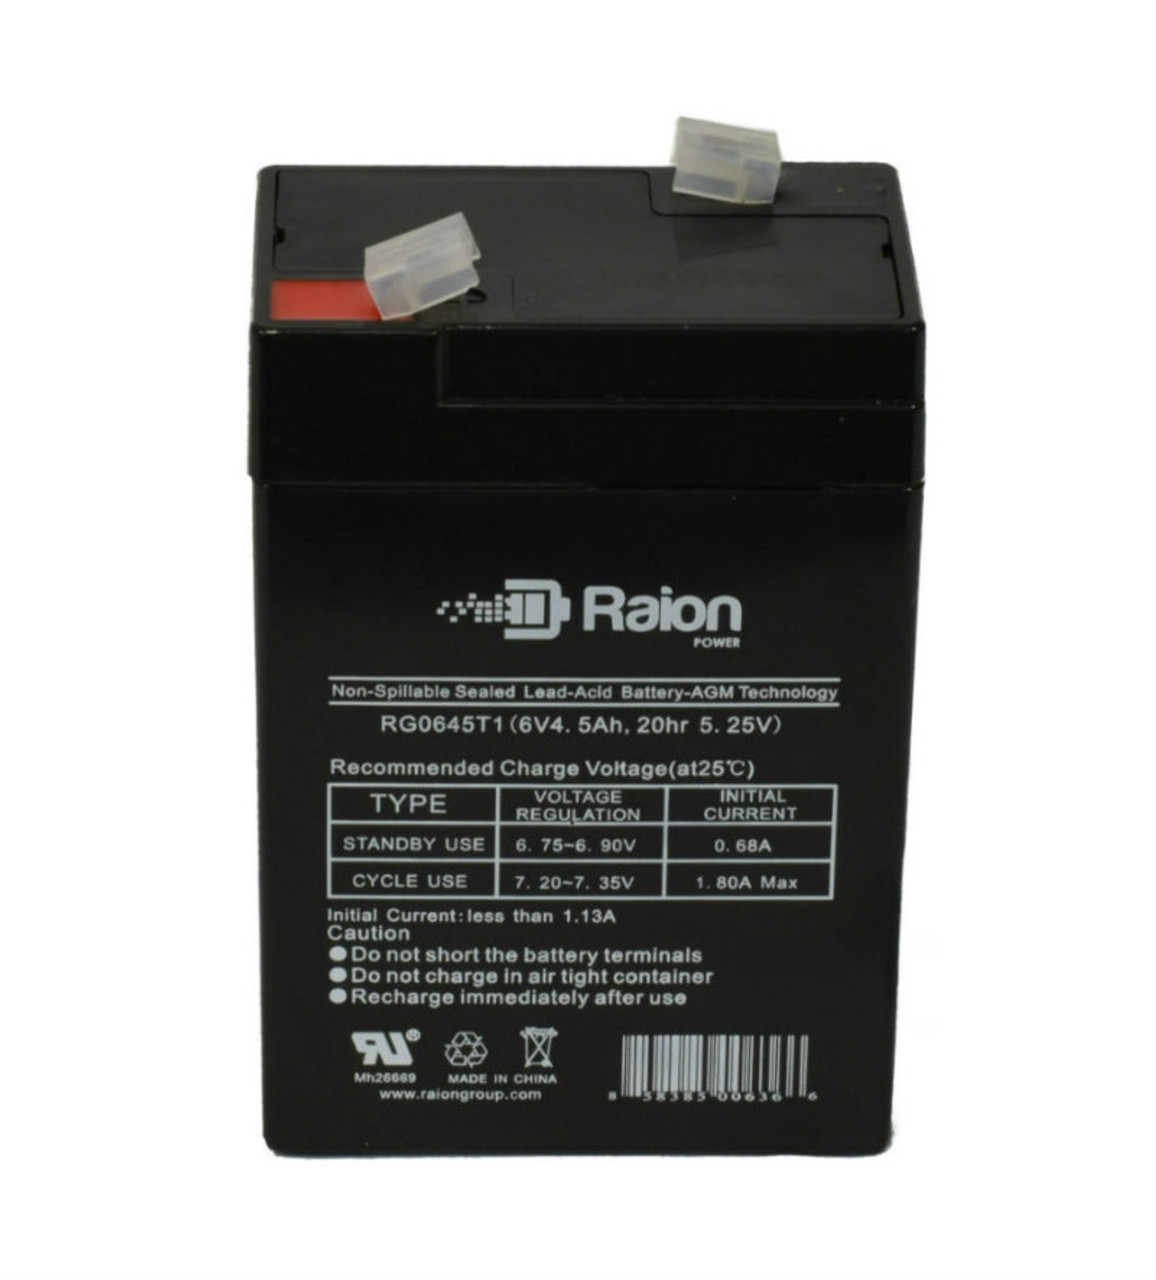 Raion Power RG0645T1 Replacement Battery Cartridge for Zeus PC4.5-6F1